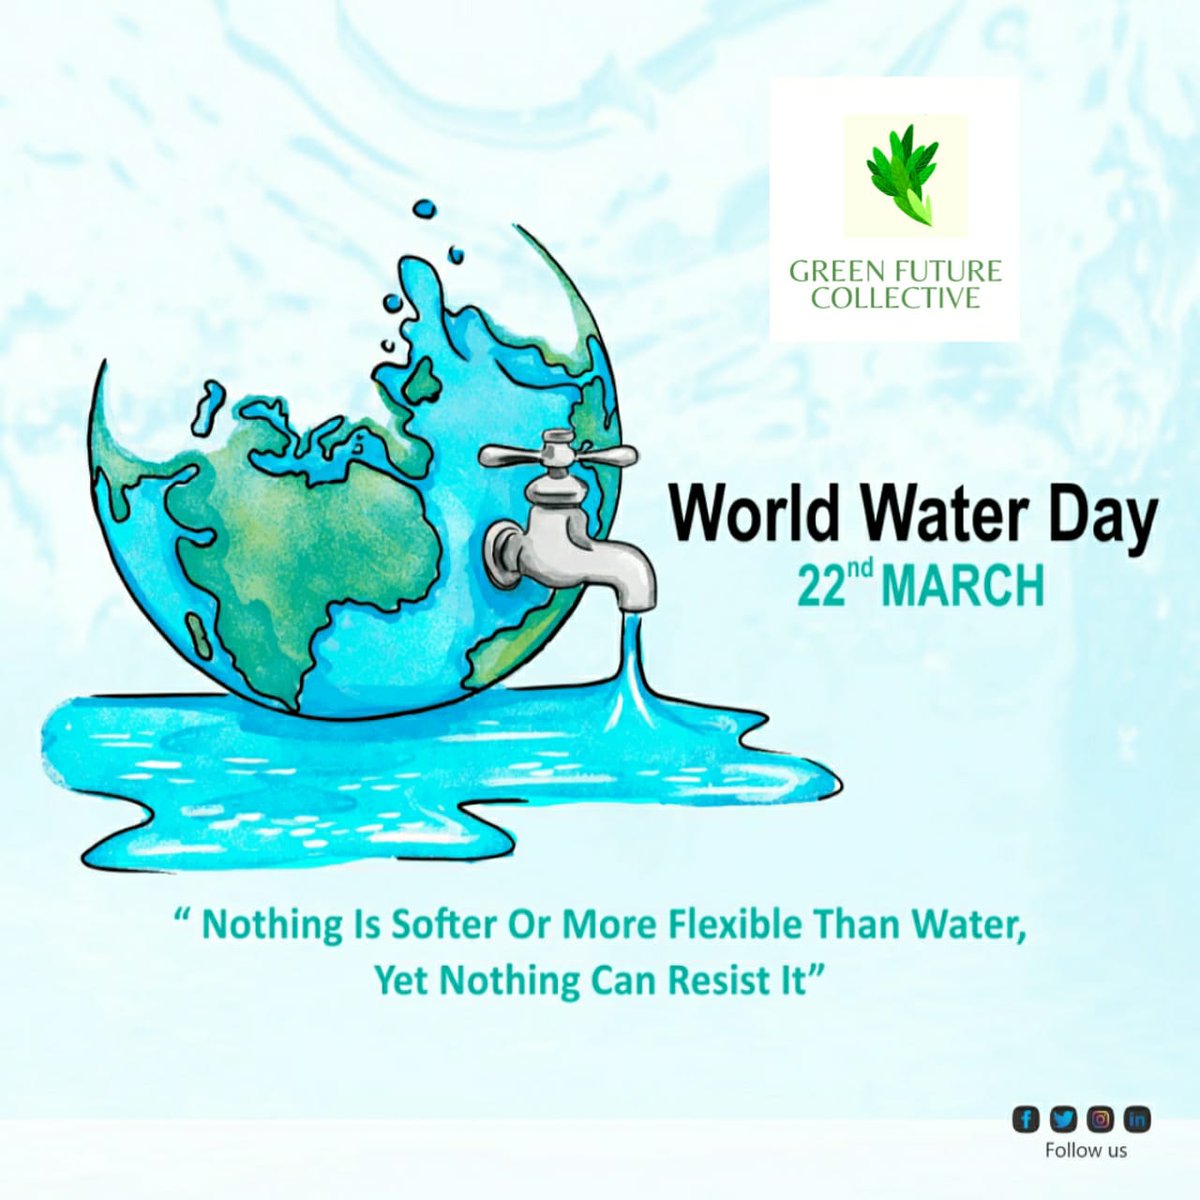 Water is central to human experience. This #WorldWaterDay , let's commit to its optimum utilisation and minimum wastage

#sustainability #ClimateCrisis #NGOs https://t.co/9HgHbn75ha